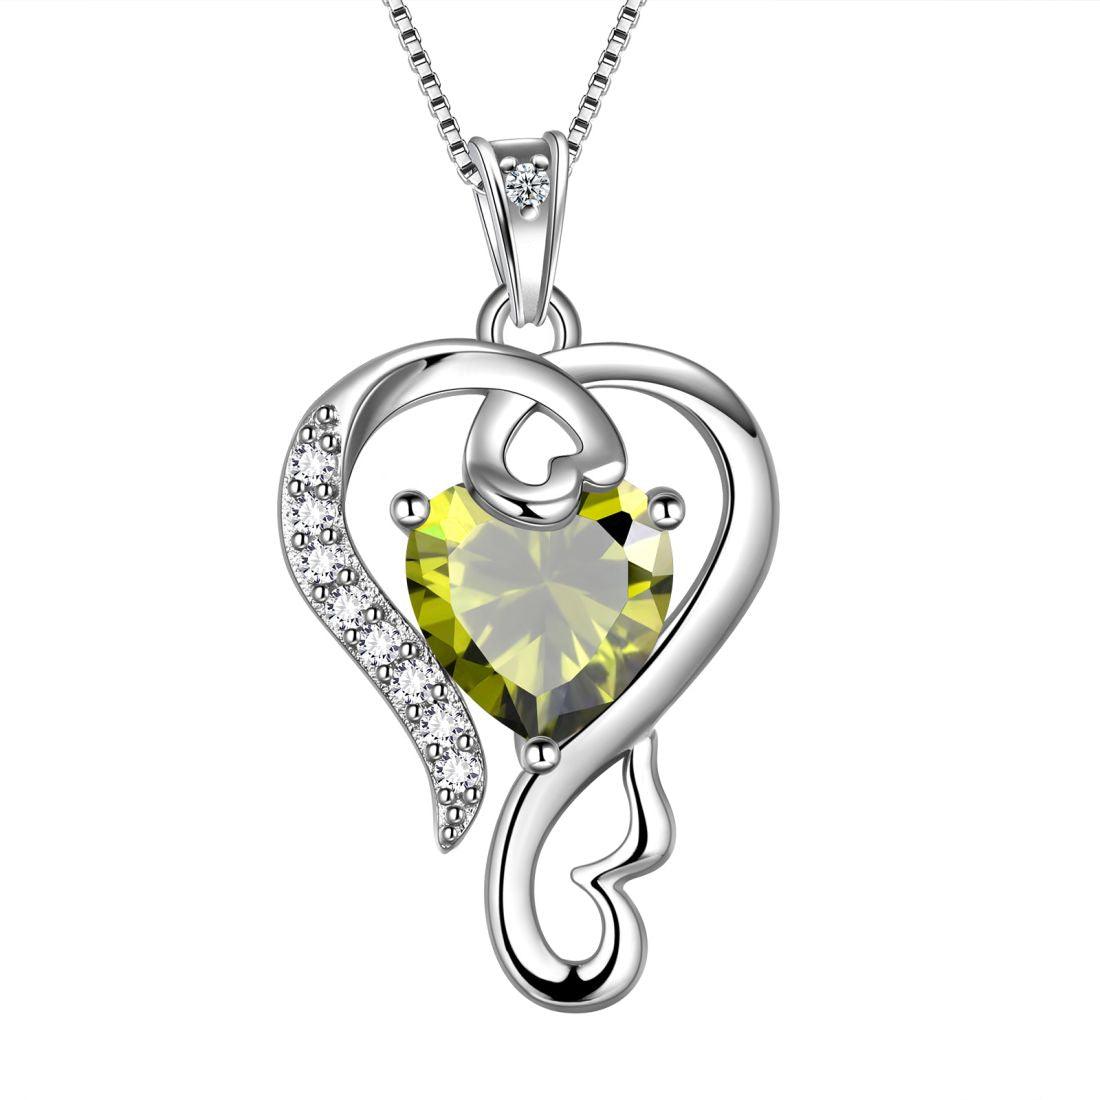 Love Heart Birthstone August Peridot Necklace Pendant - Necklaces - Aurora Tears